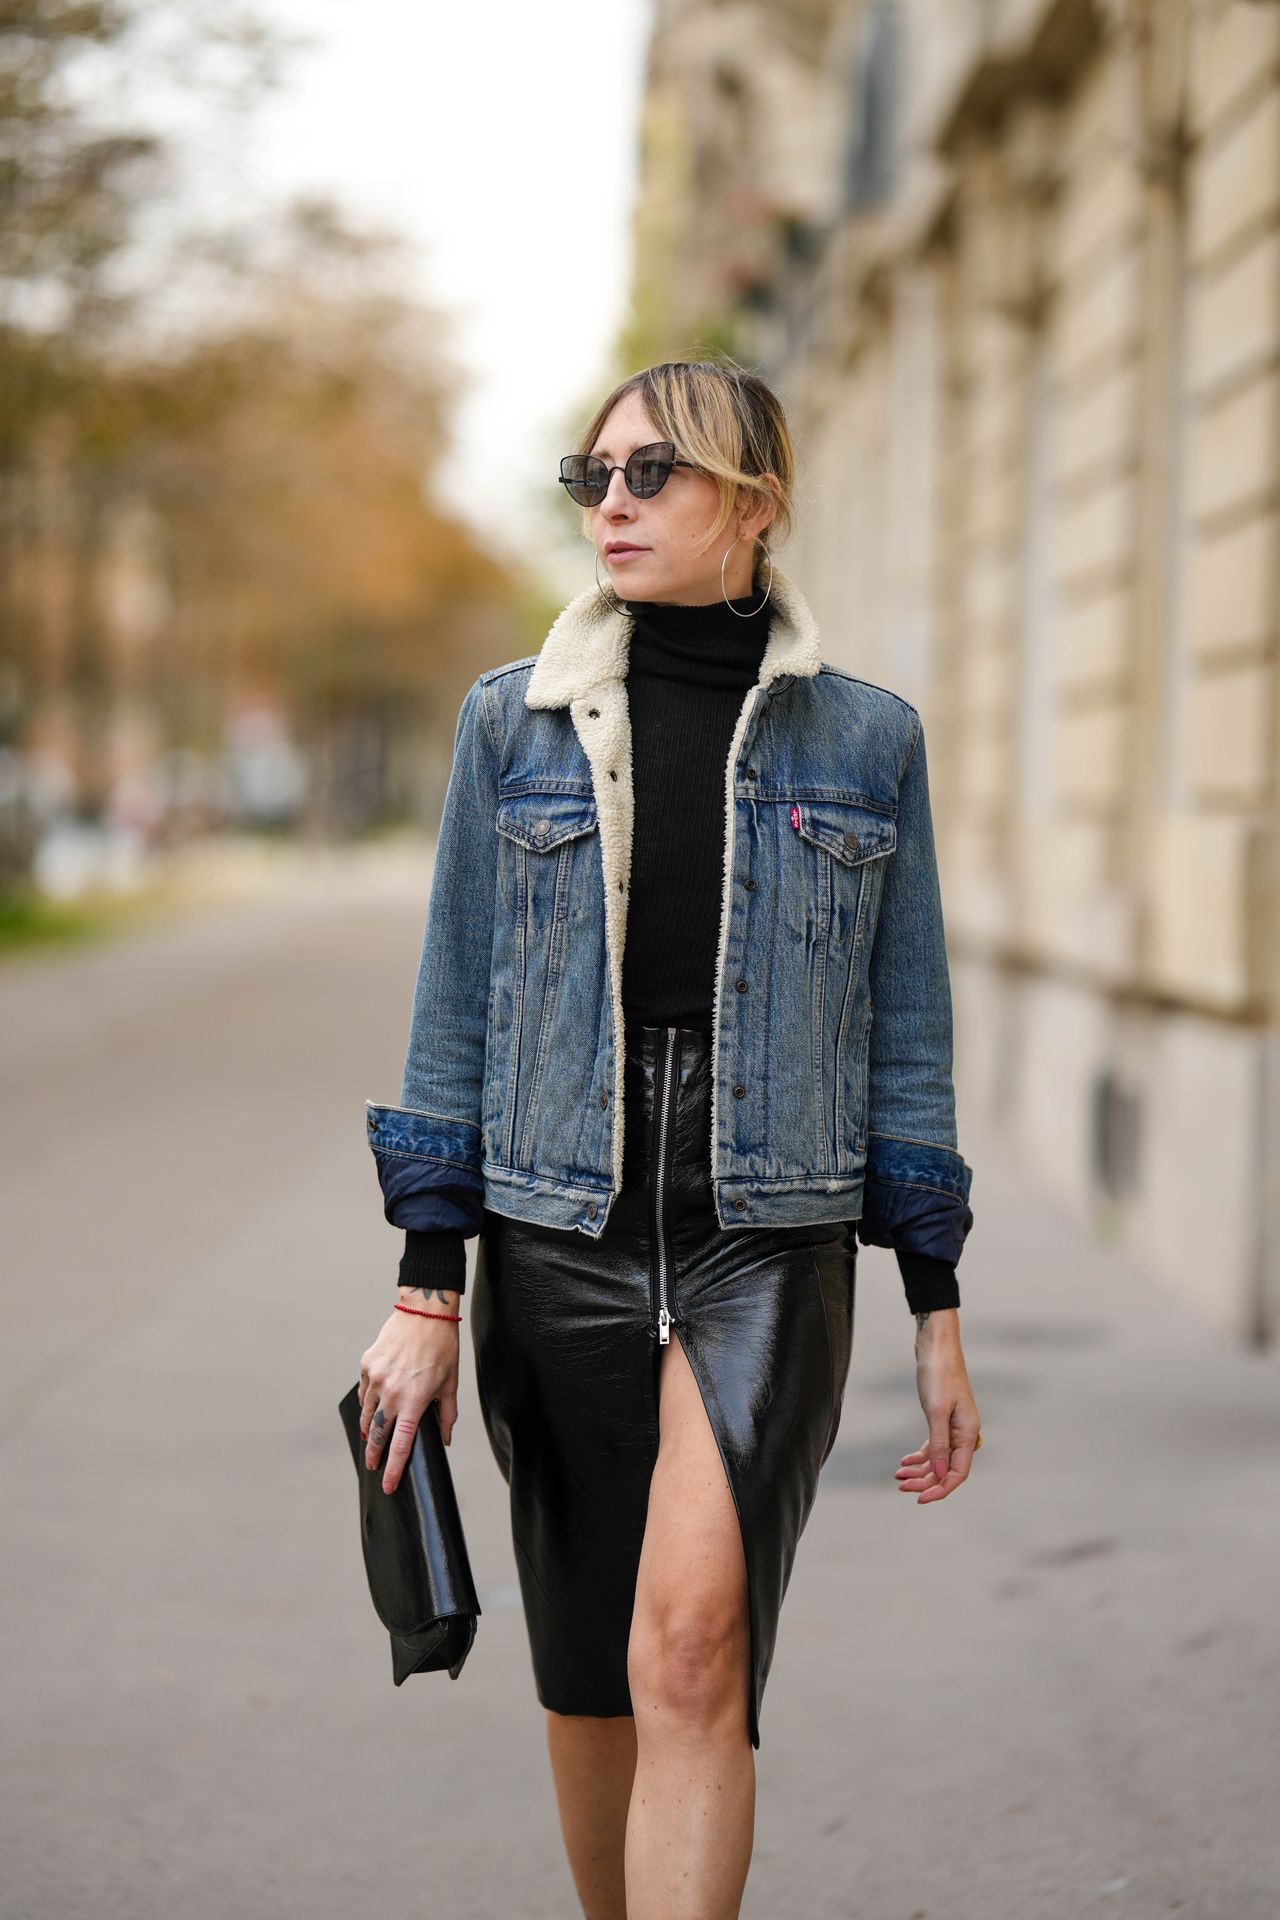 20 Chic Fall Outfit Ideas, Approved by Stylists and Editors | Marie Claire